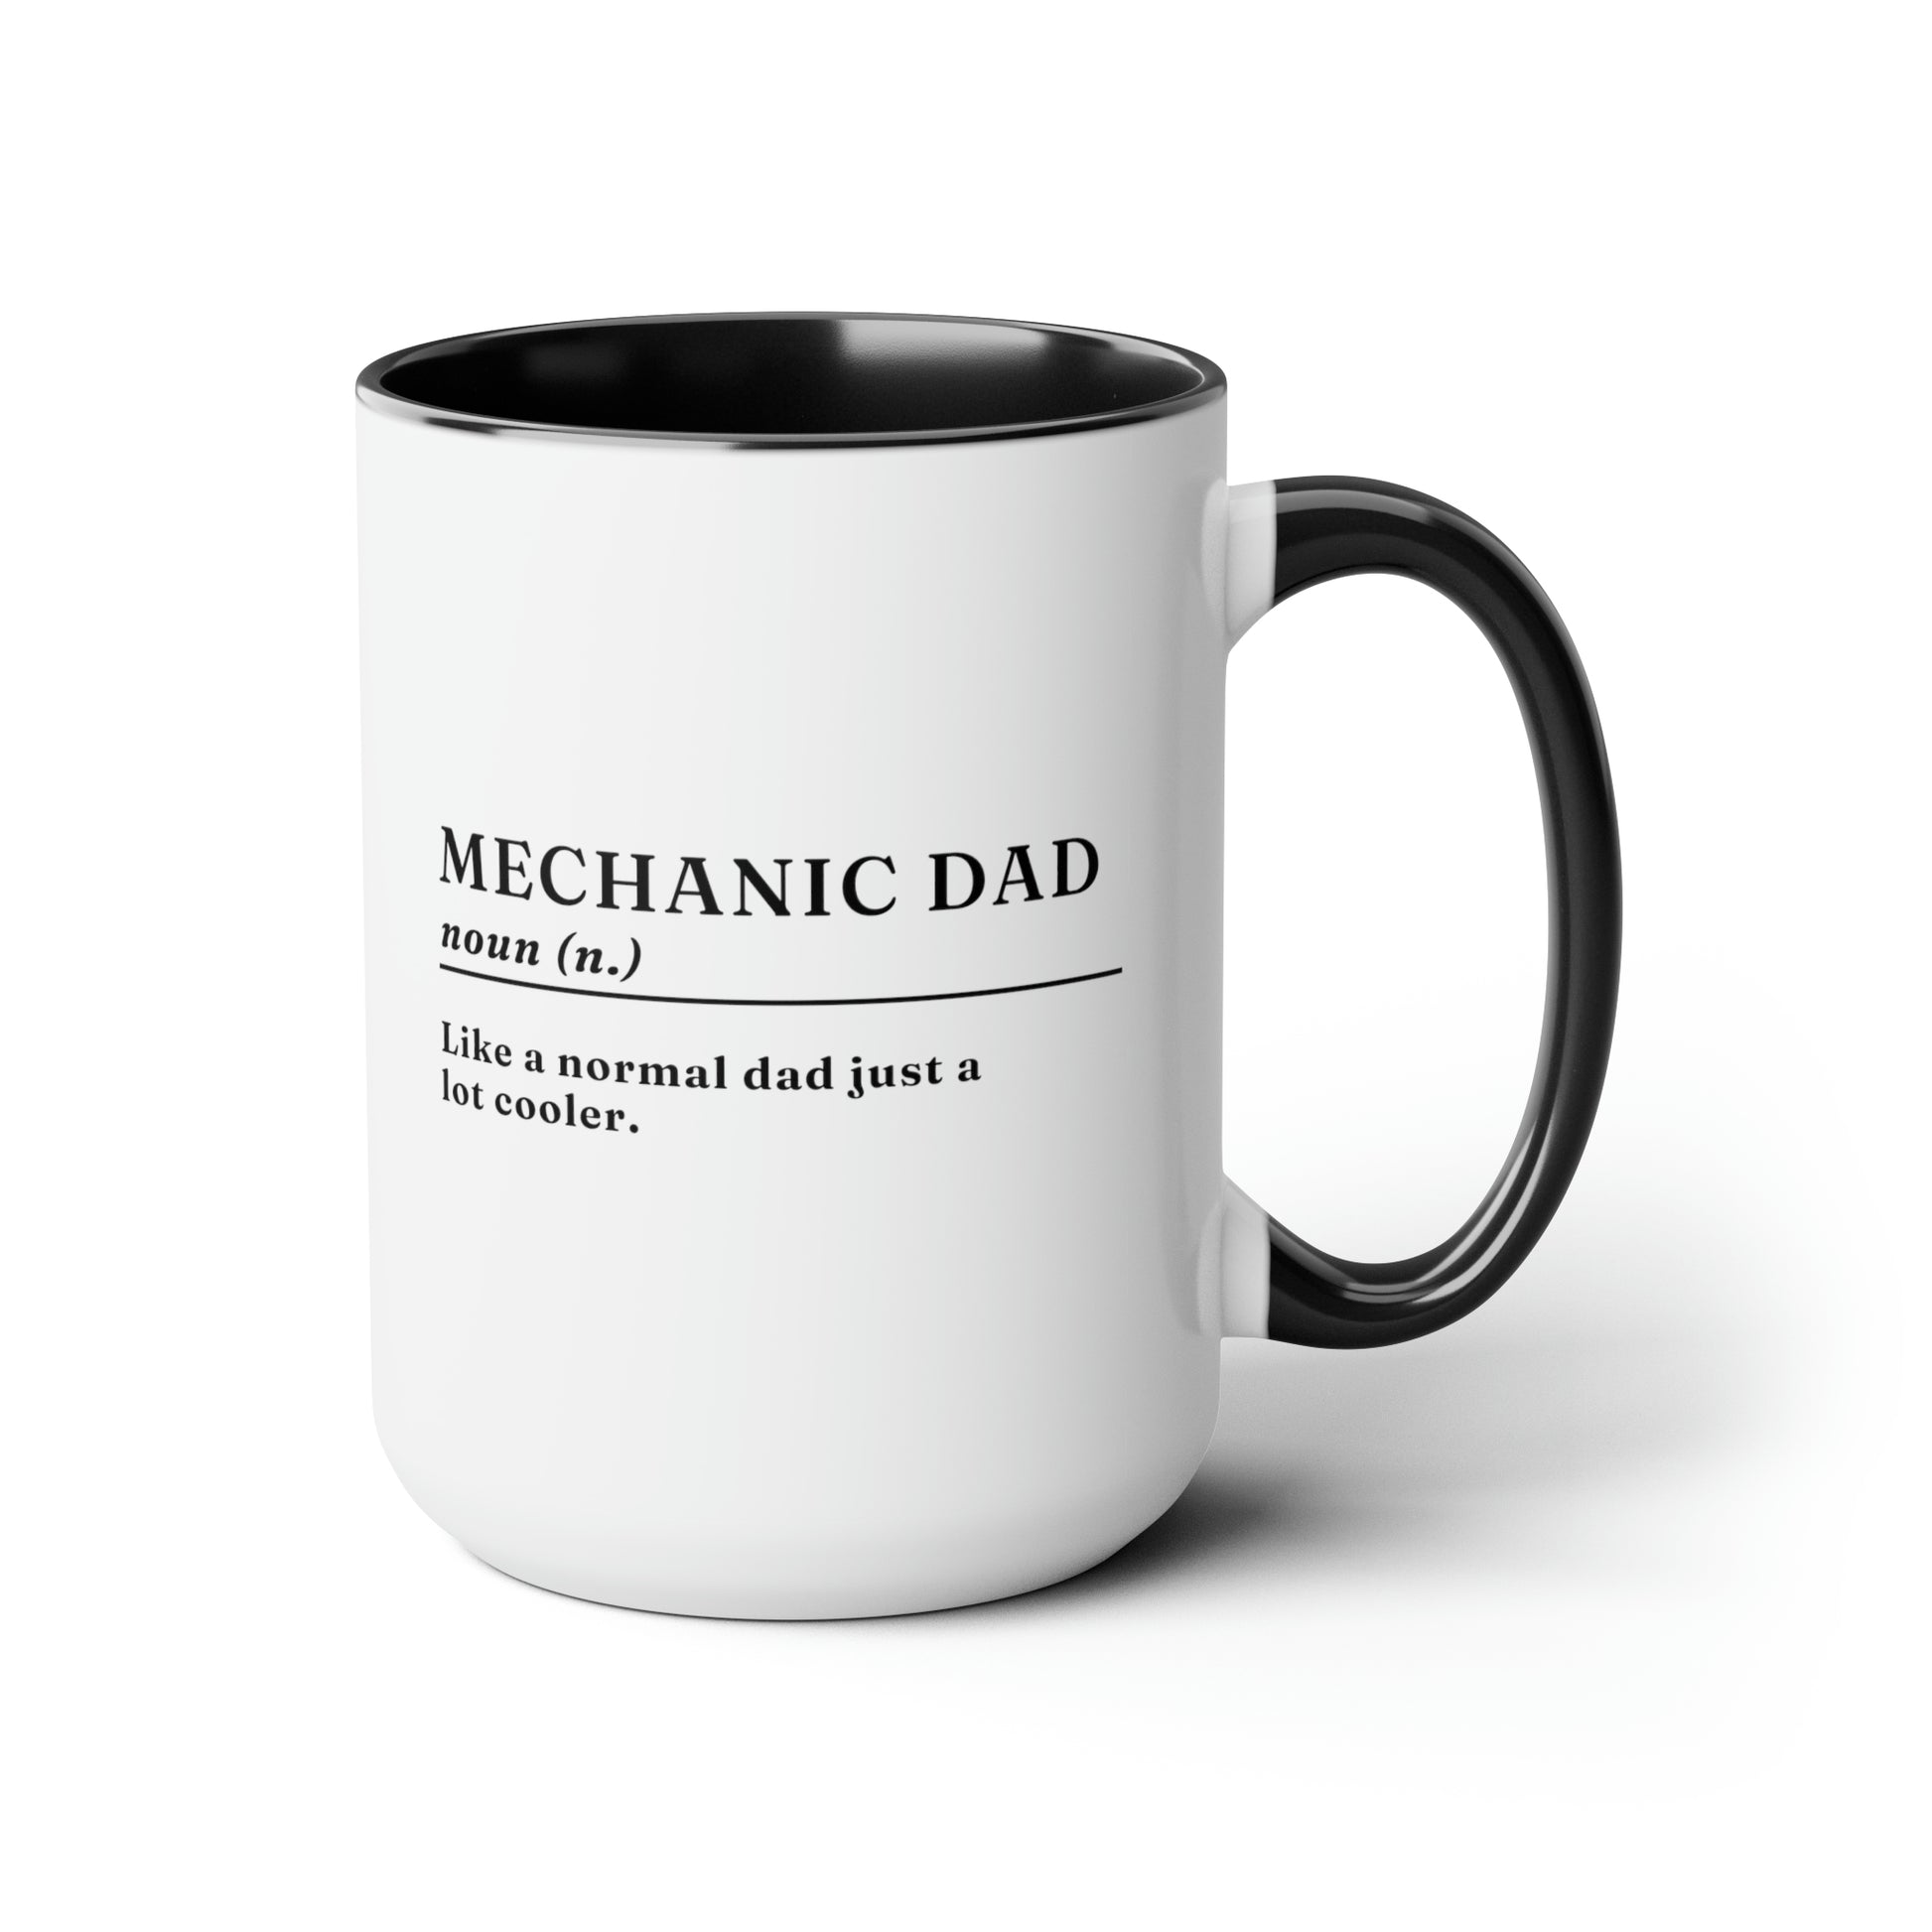 Mechanic Dad Definition 15oz white with black accent funny large coffee mug gift for dad fathers day daddy birthday anniversary waveywares wavey wares wavywares wavy wares